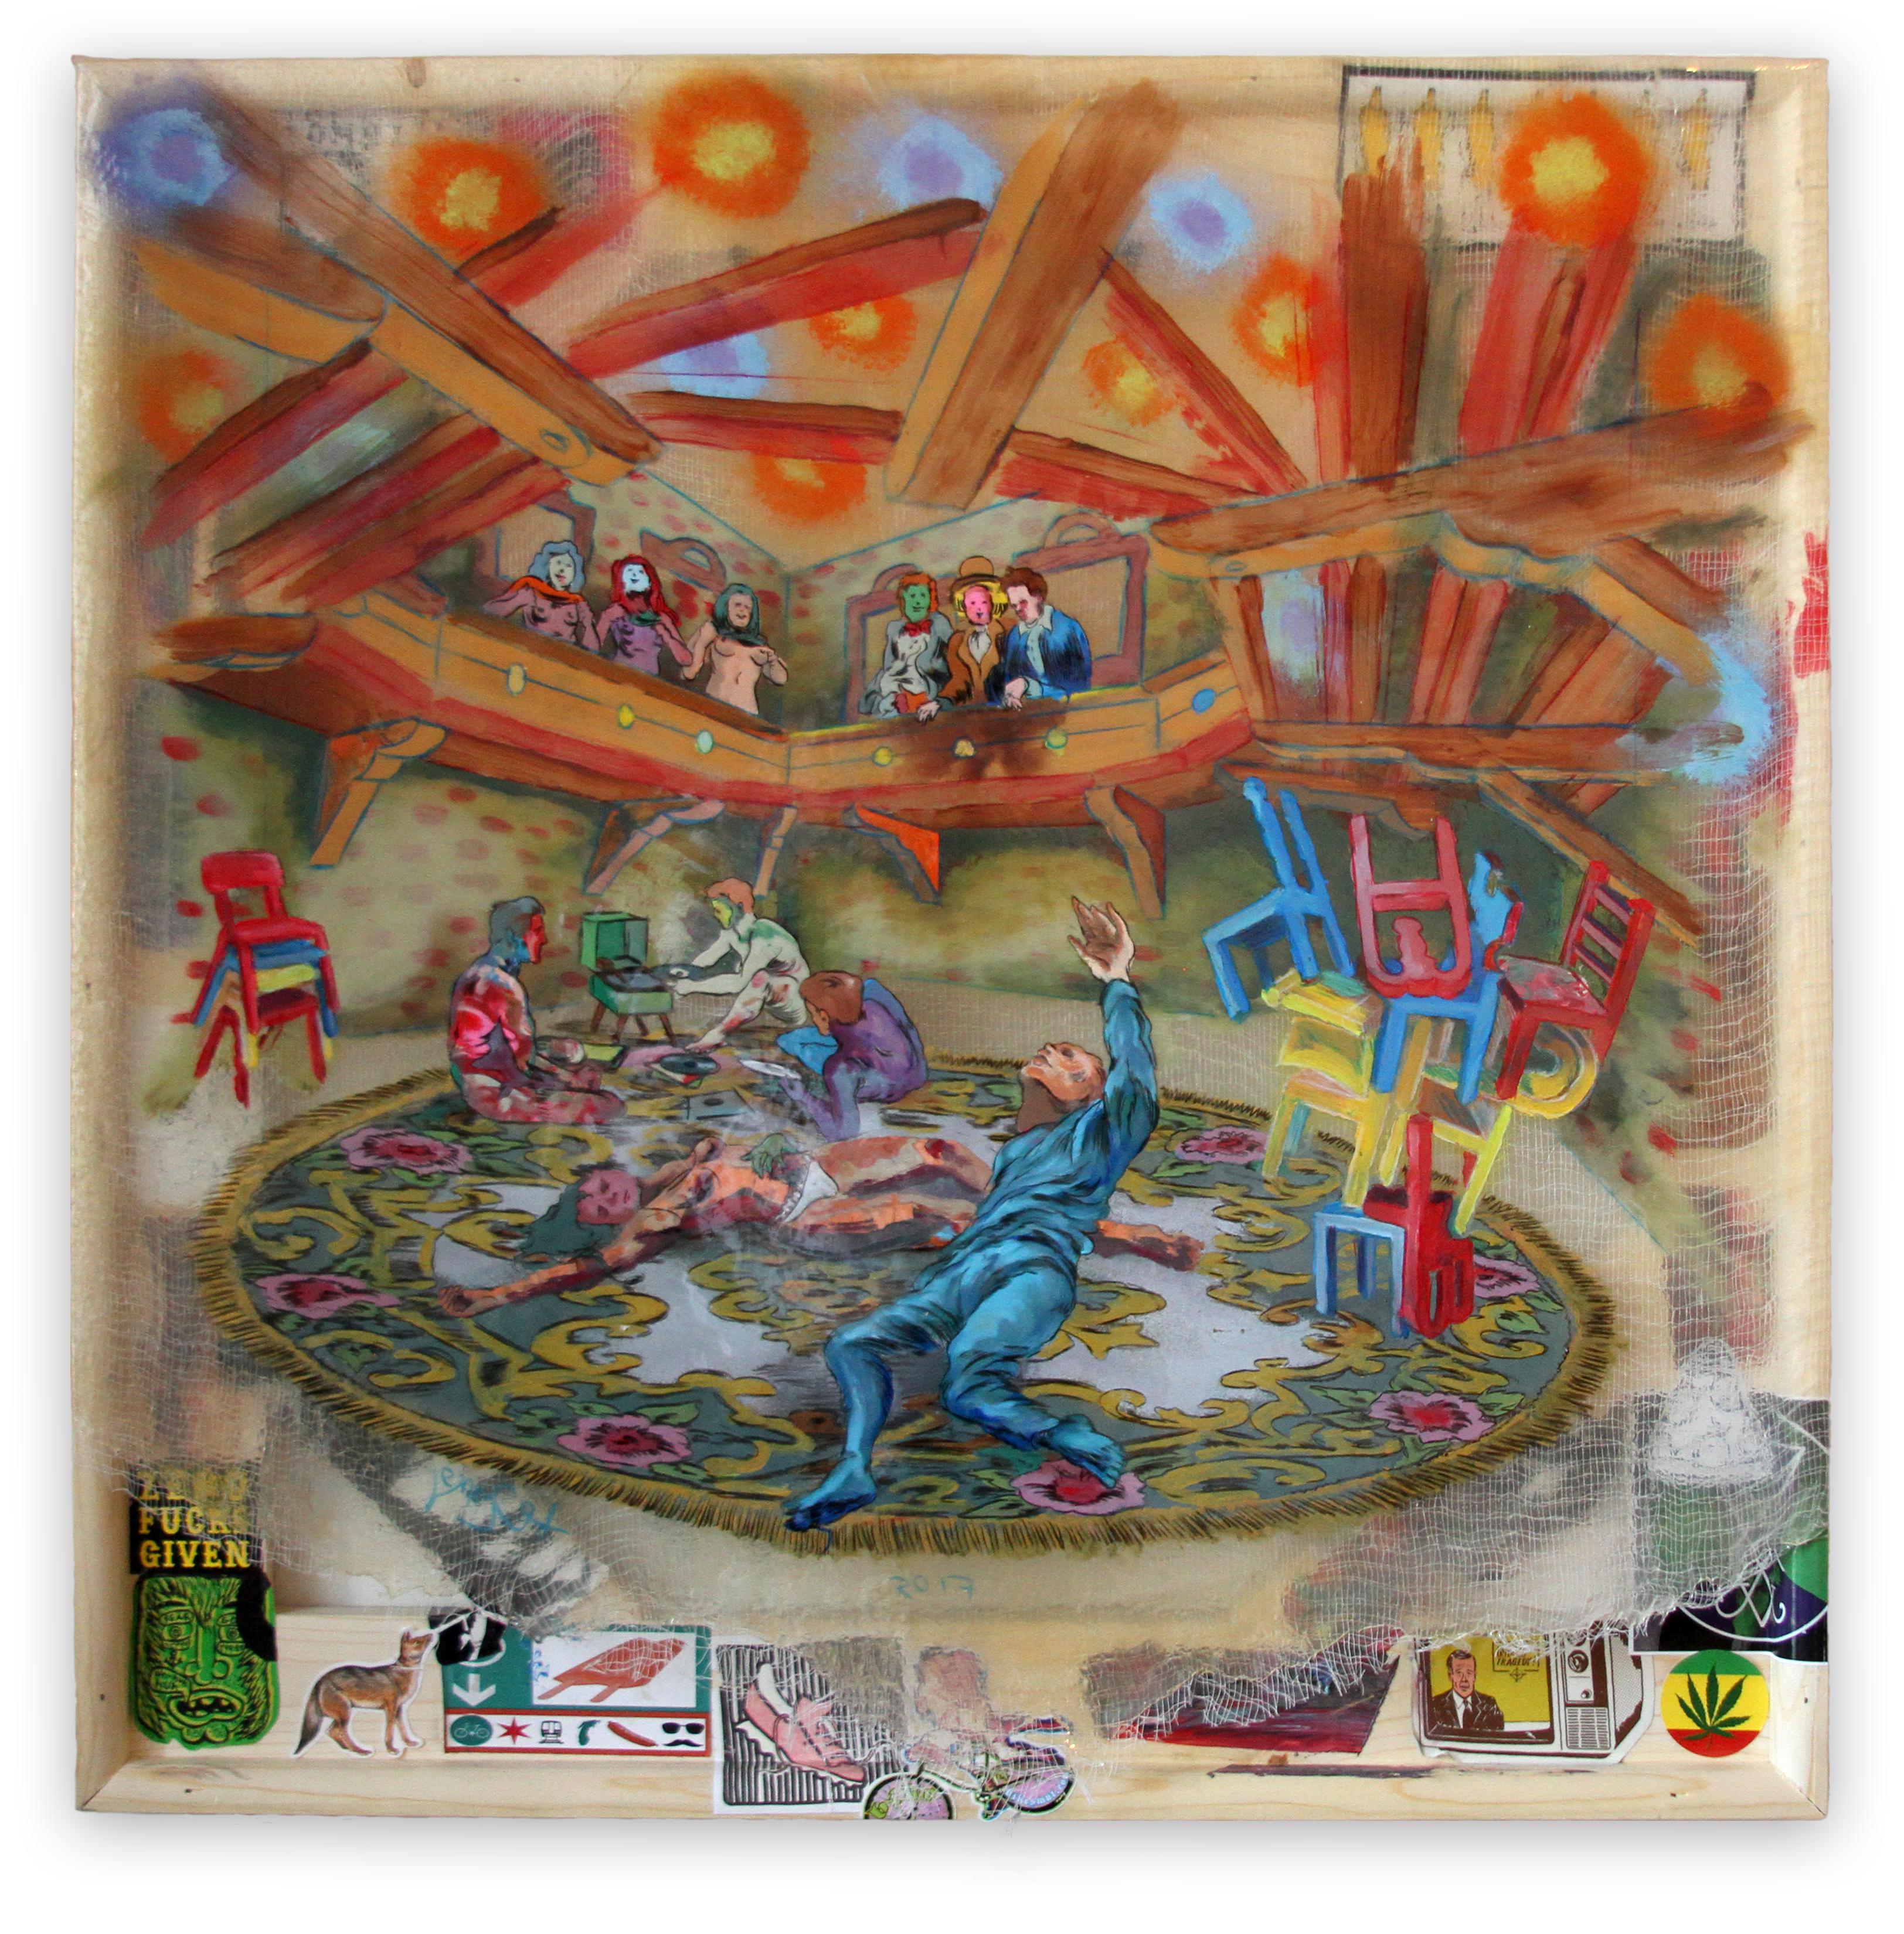 Andrew LeMay Cox Figurative Painting - Musical Chairs - brightly colored animated scene, ink on canvas